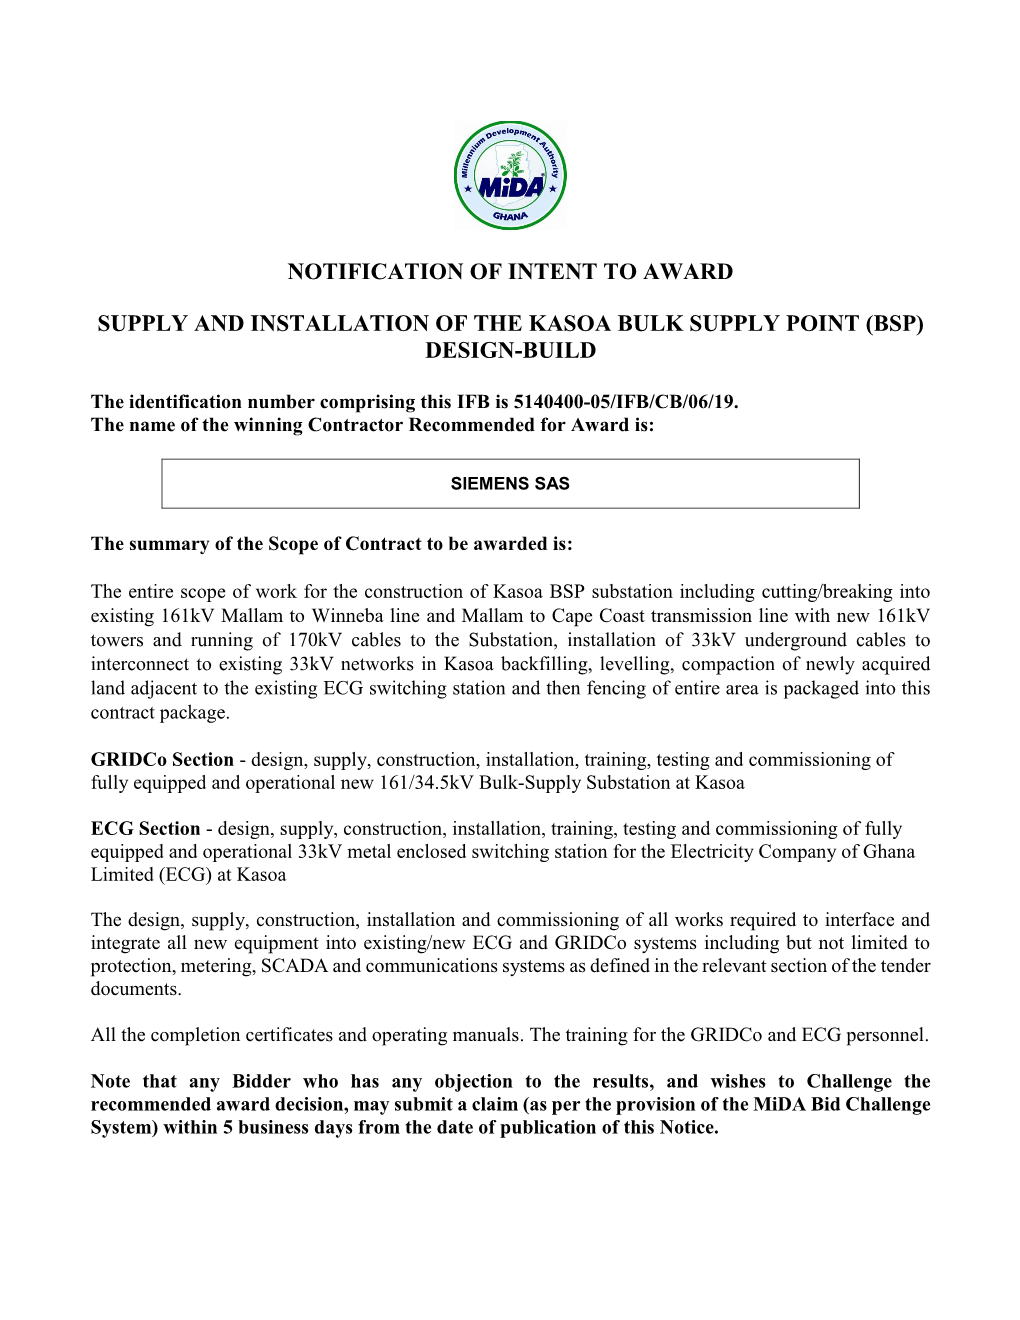 Notification of Intent to Award Supply and Installation of the Kasoa Bulk Supply Point